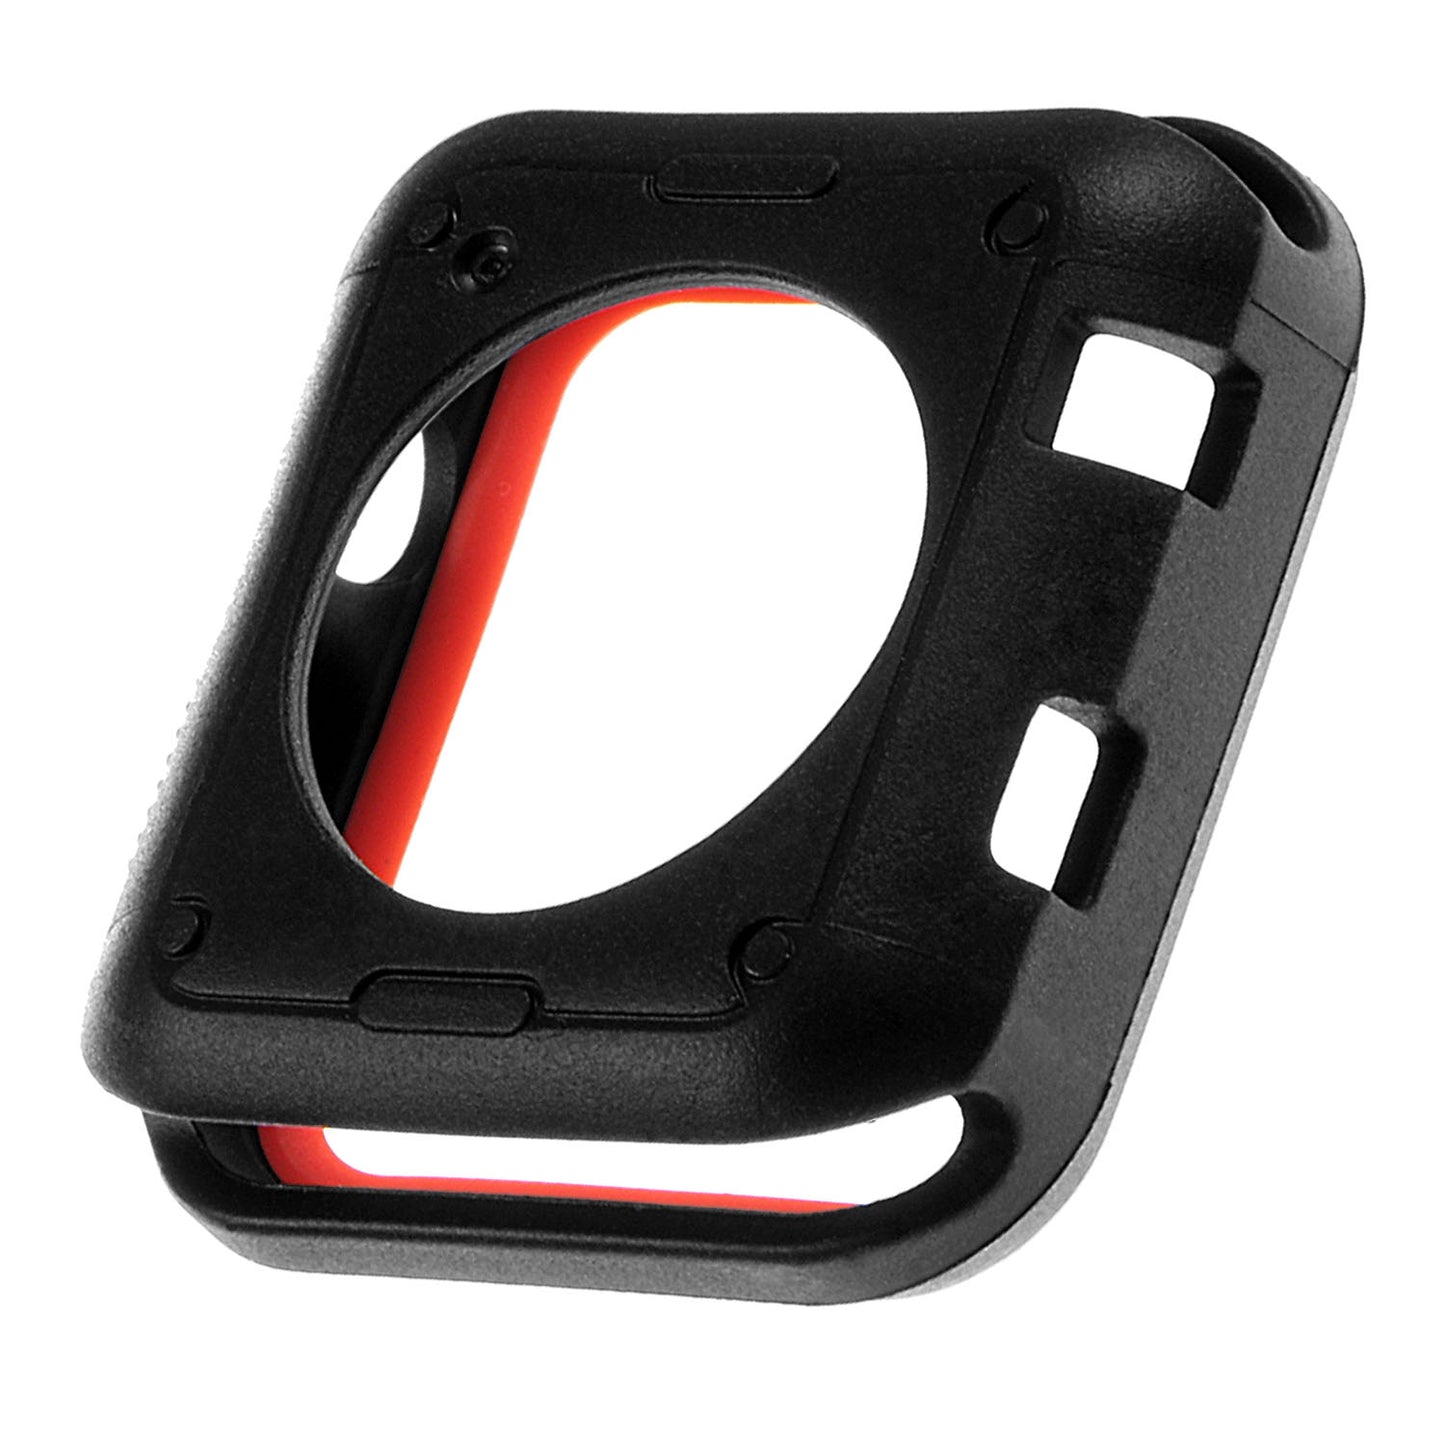 TPU Protective Case for Apple Watch Series 1/2/3